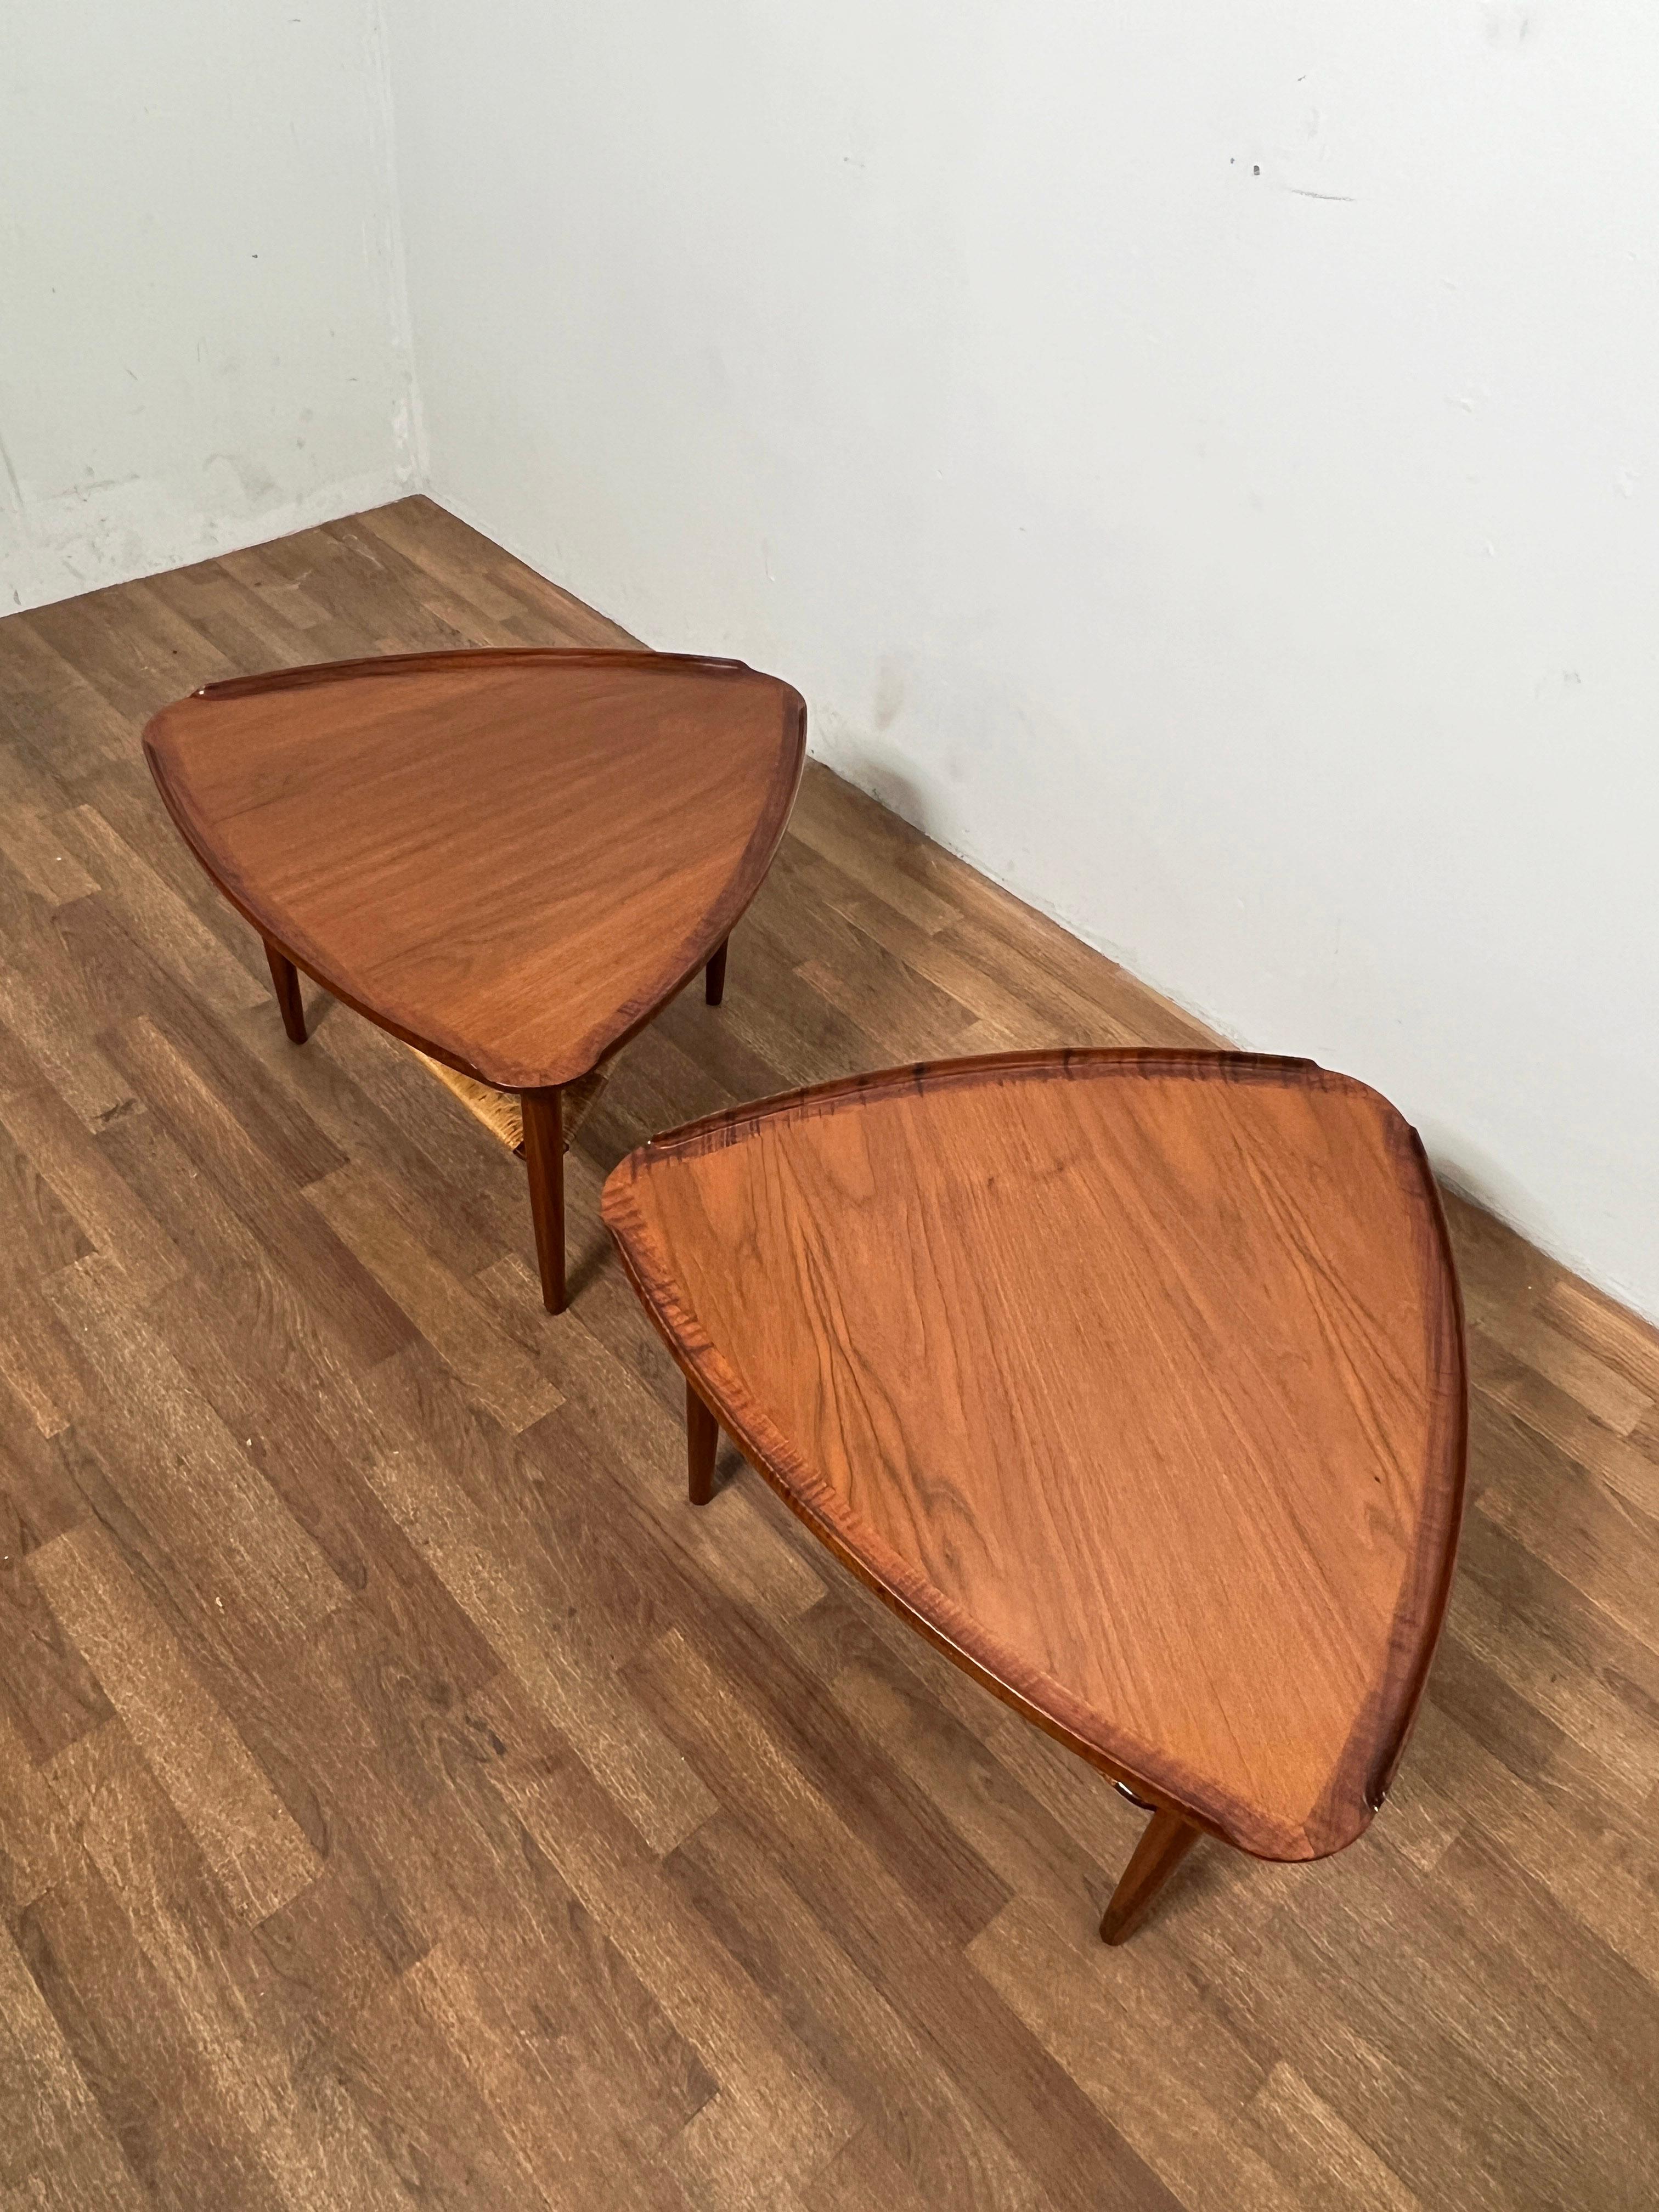 Pair of Poul Jensen for Selig Teak and Cane Tripod Side Tables C. 1960s In Good Condition For Sale In Peabody, MA